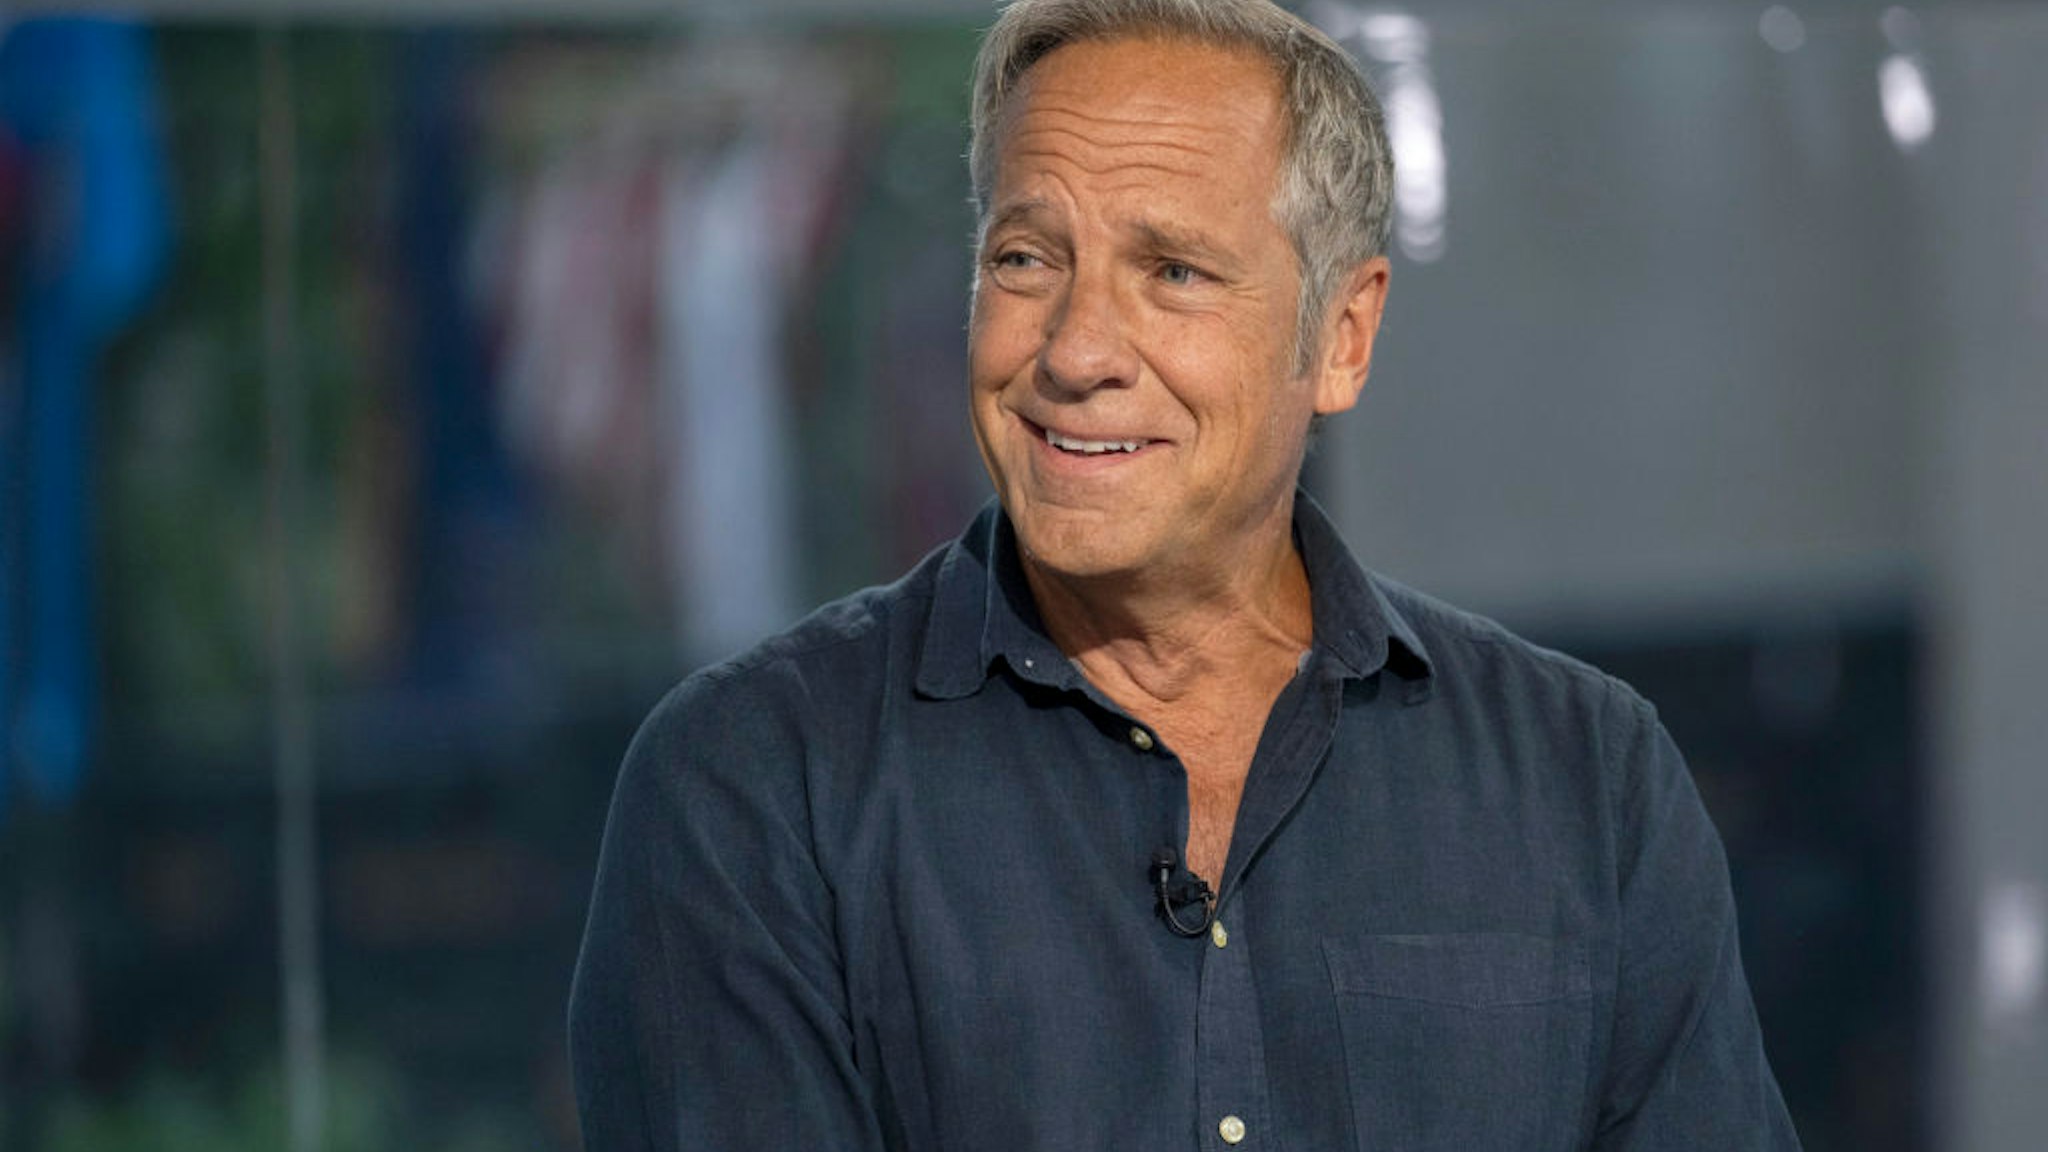 TODAY -- Pictured: Mike Rowe on Monday, August 15, 2022 -- (Photo by: Nathan Congleton/NBC via Getty Images)